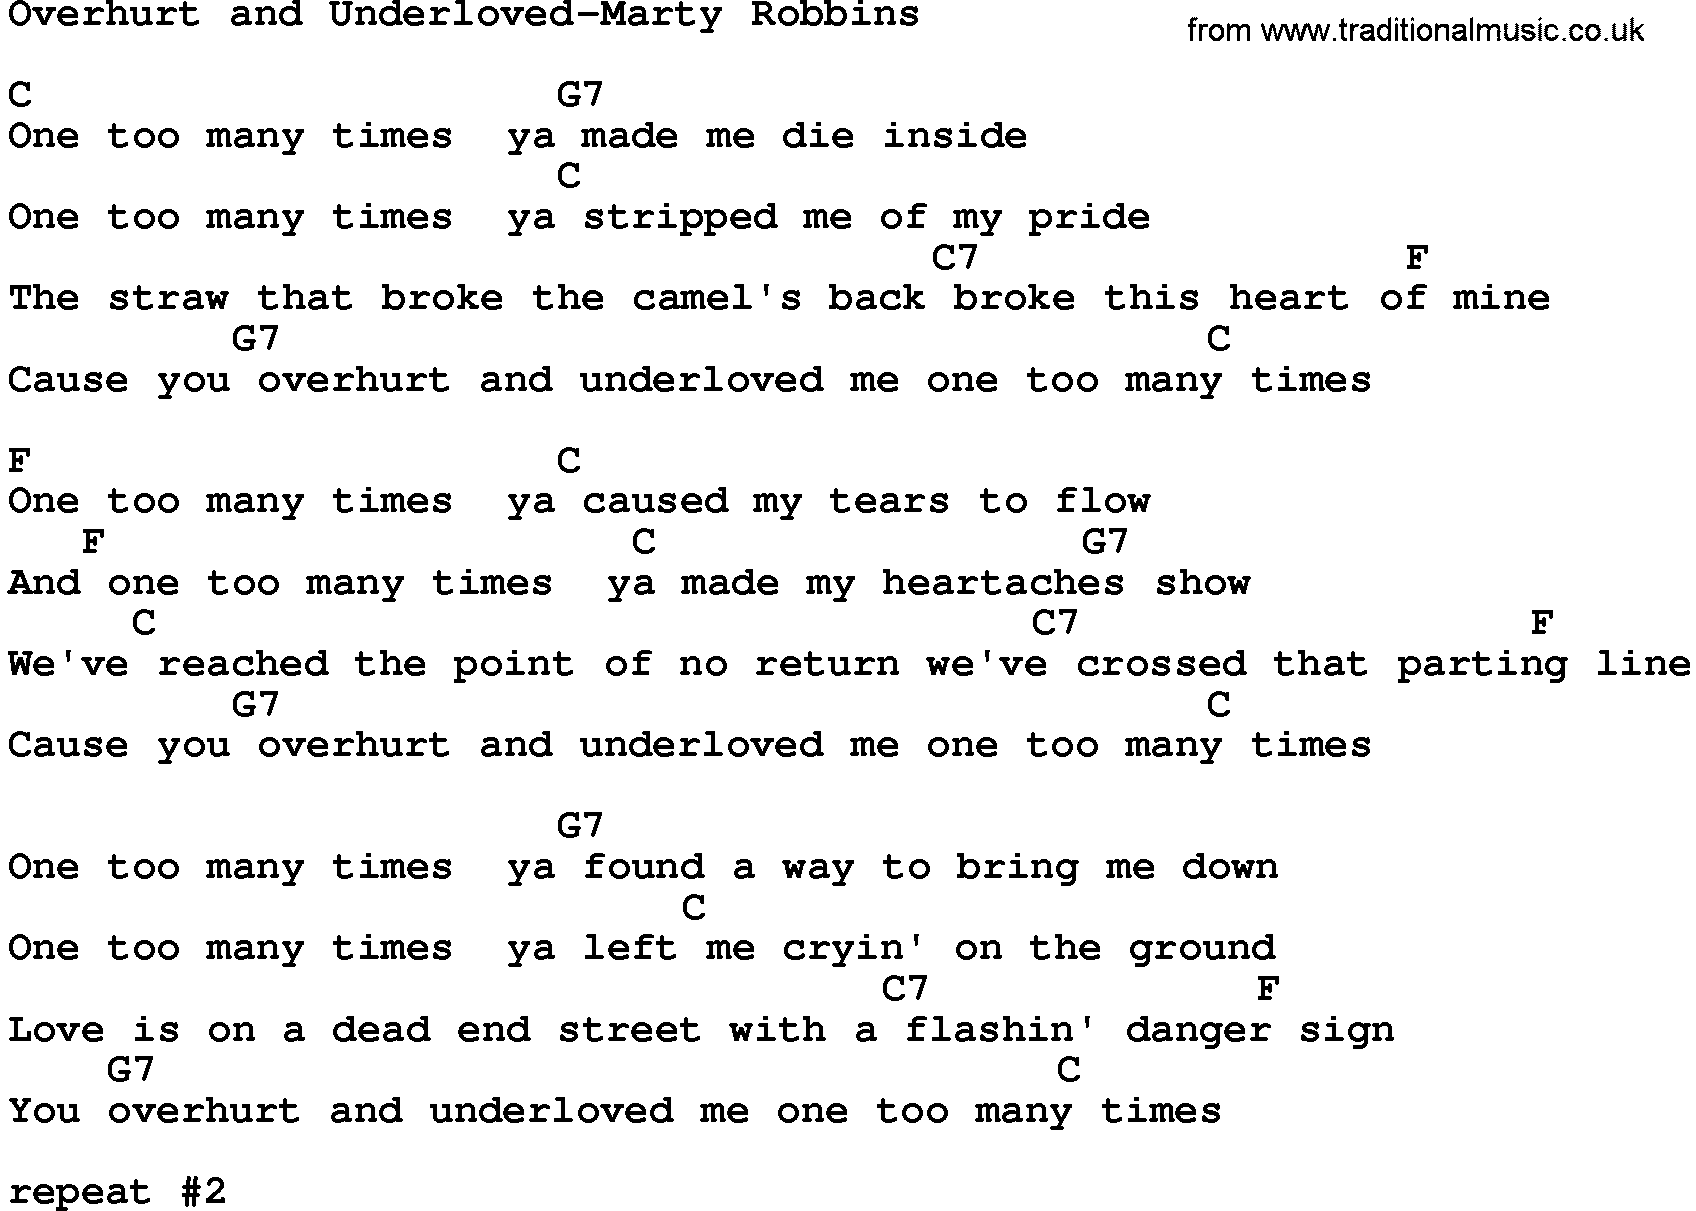 Country music song: Overhurt And Underloved-Marty Robbins lyrics and chords